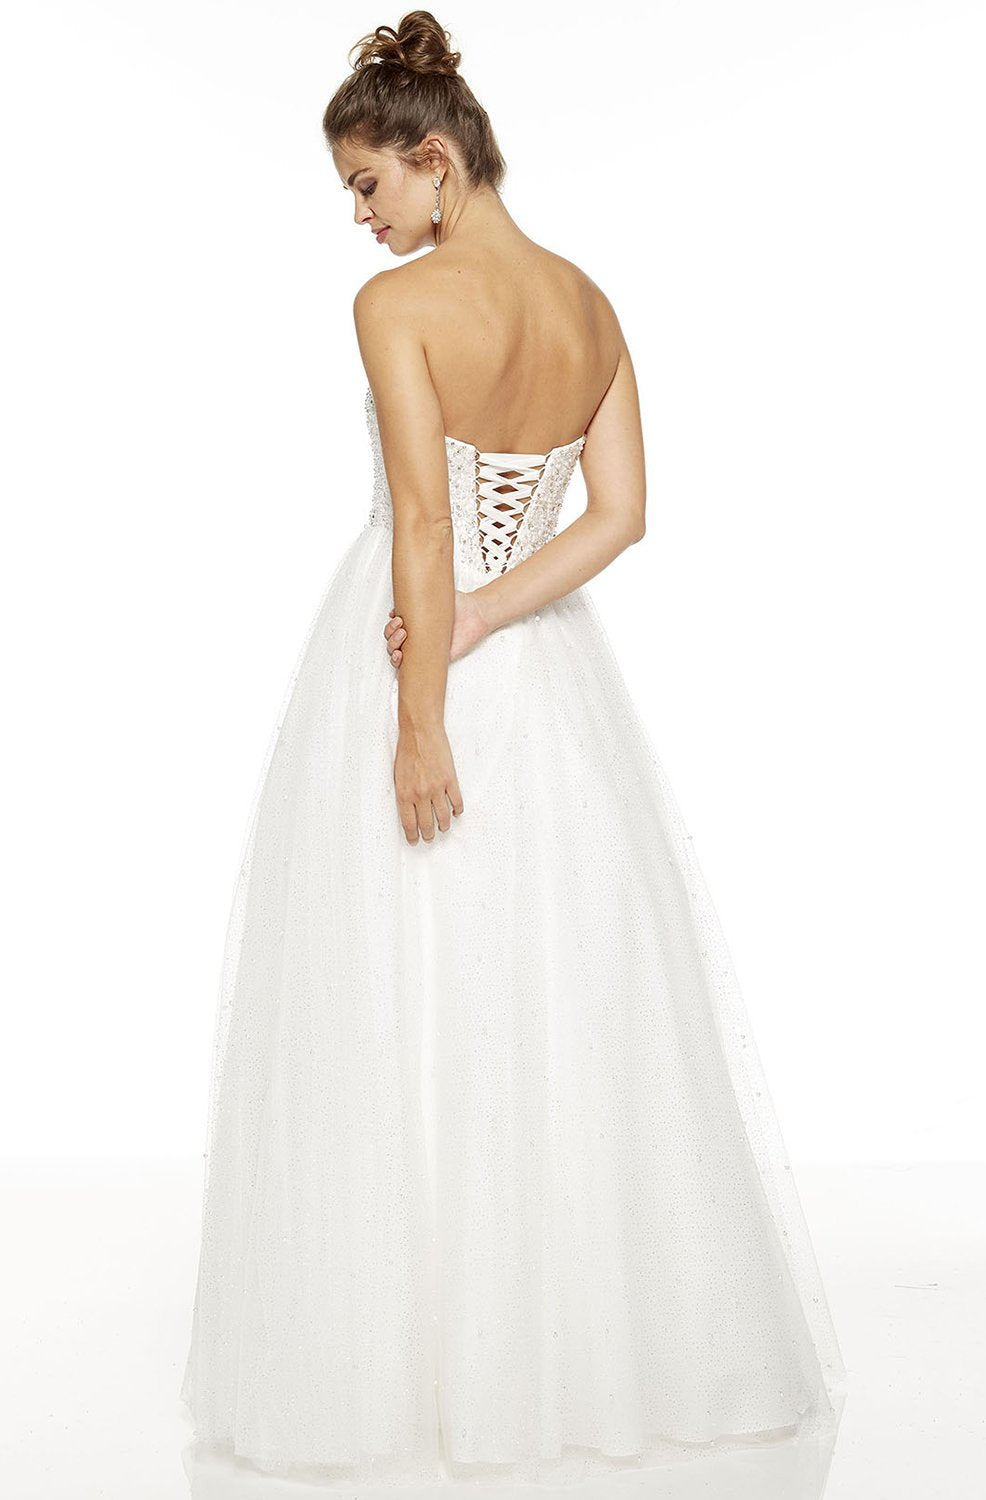 Alyce Paris - 60618 Strapless Sweetheart Bridal Dress in White